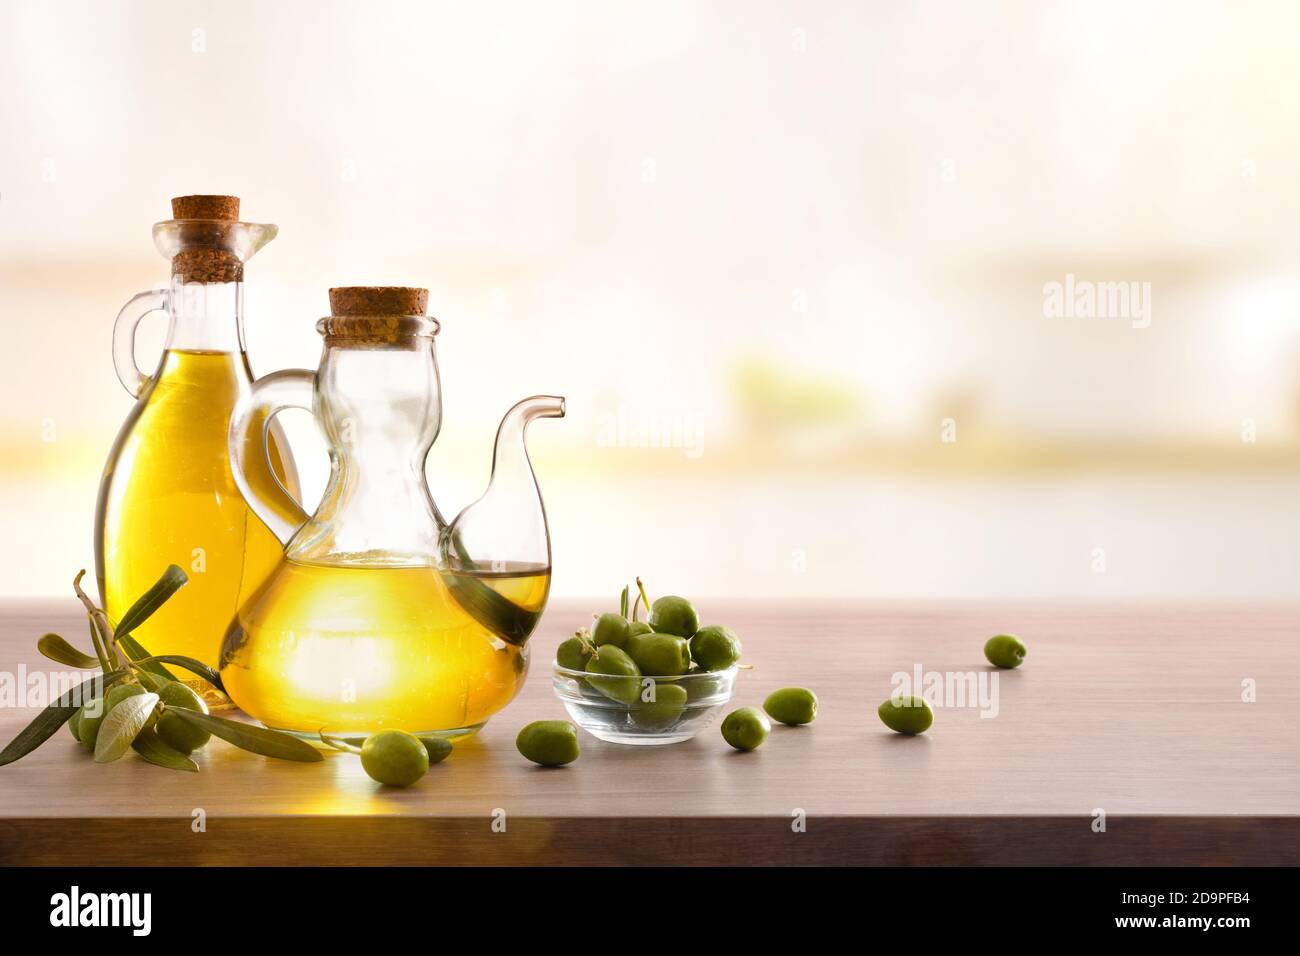 Olive oil in two glass containers and harvest olives on the wooden bench in a kitchen. Front view. Stock Photo